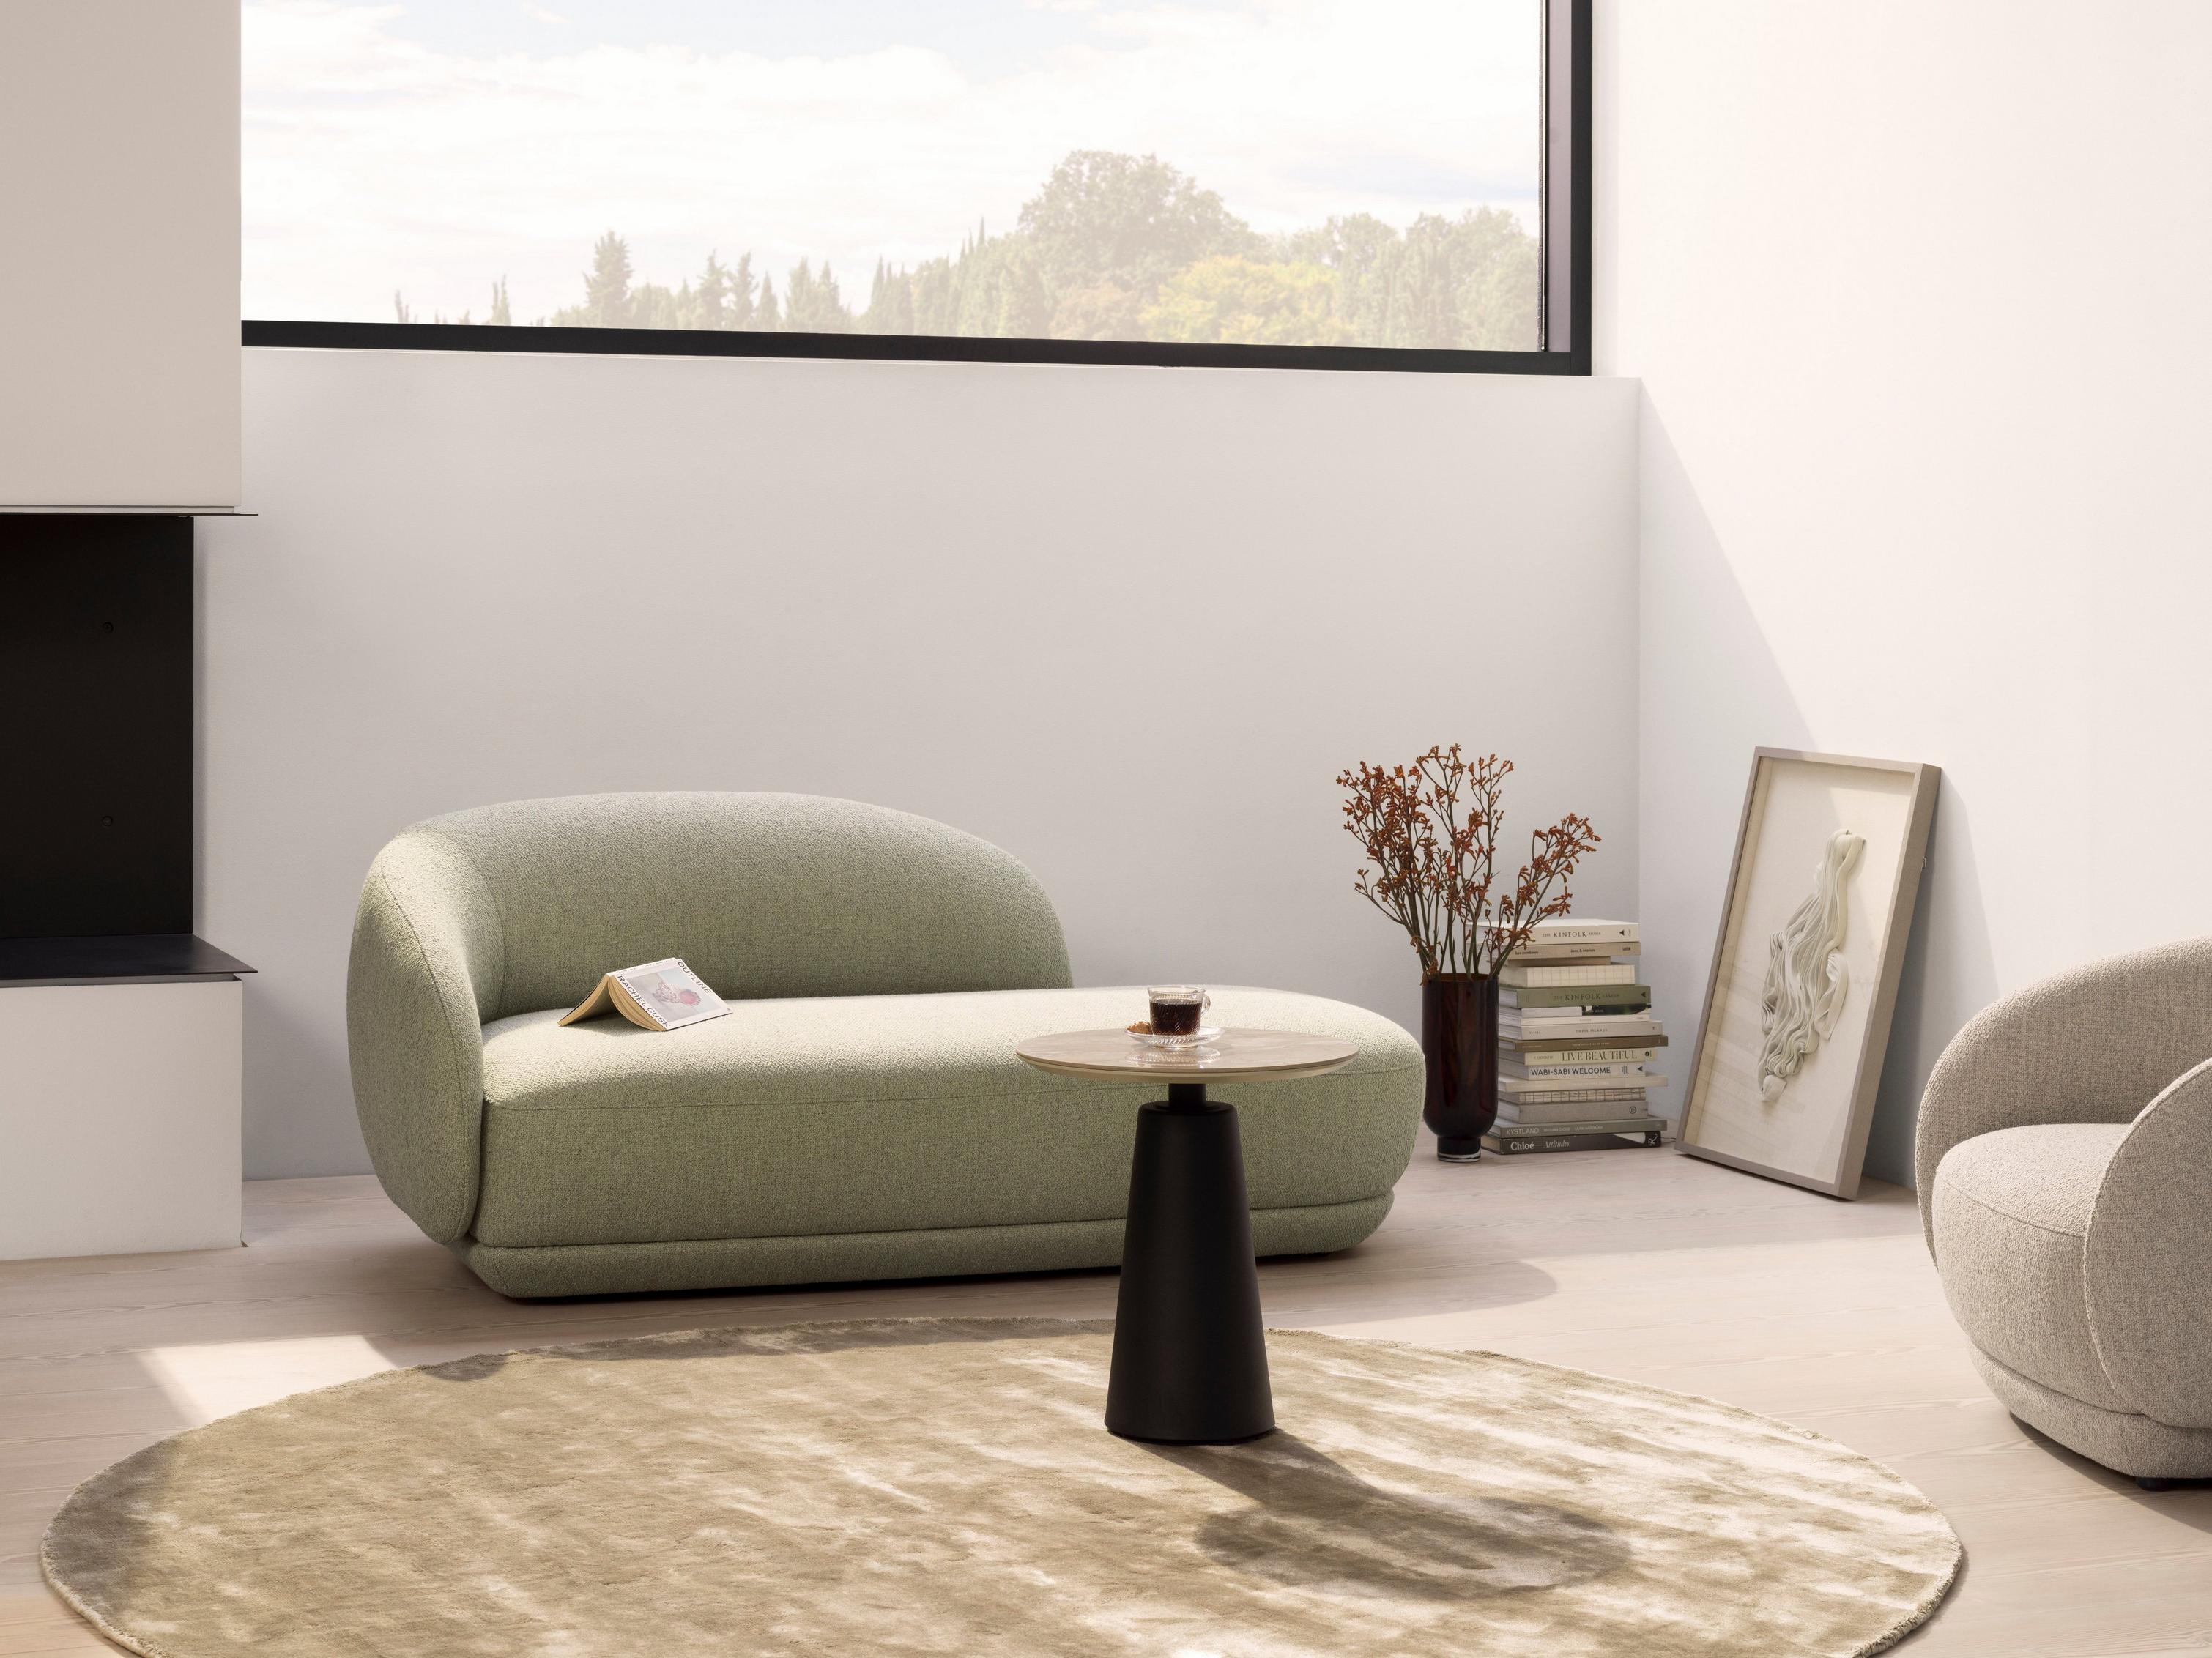 Relaxing living room with the Bolzano chaise longue sofa in light green Lazio fabric.